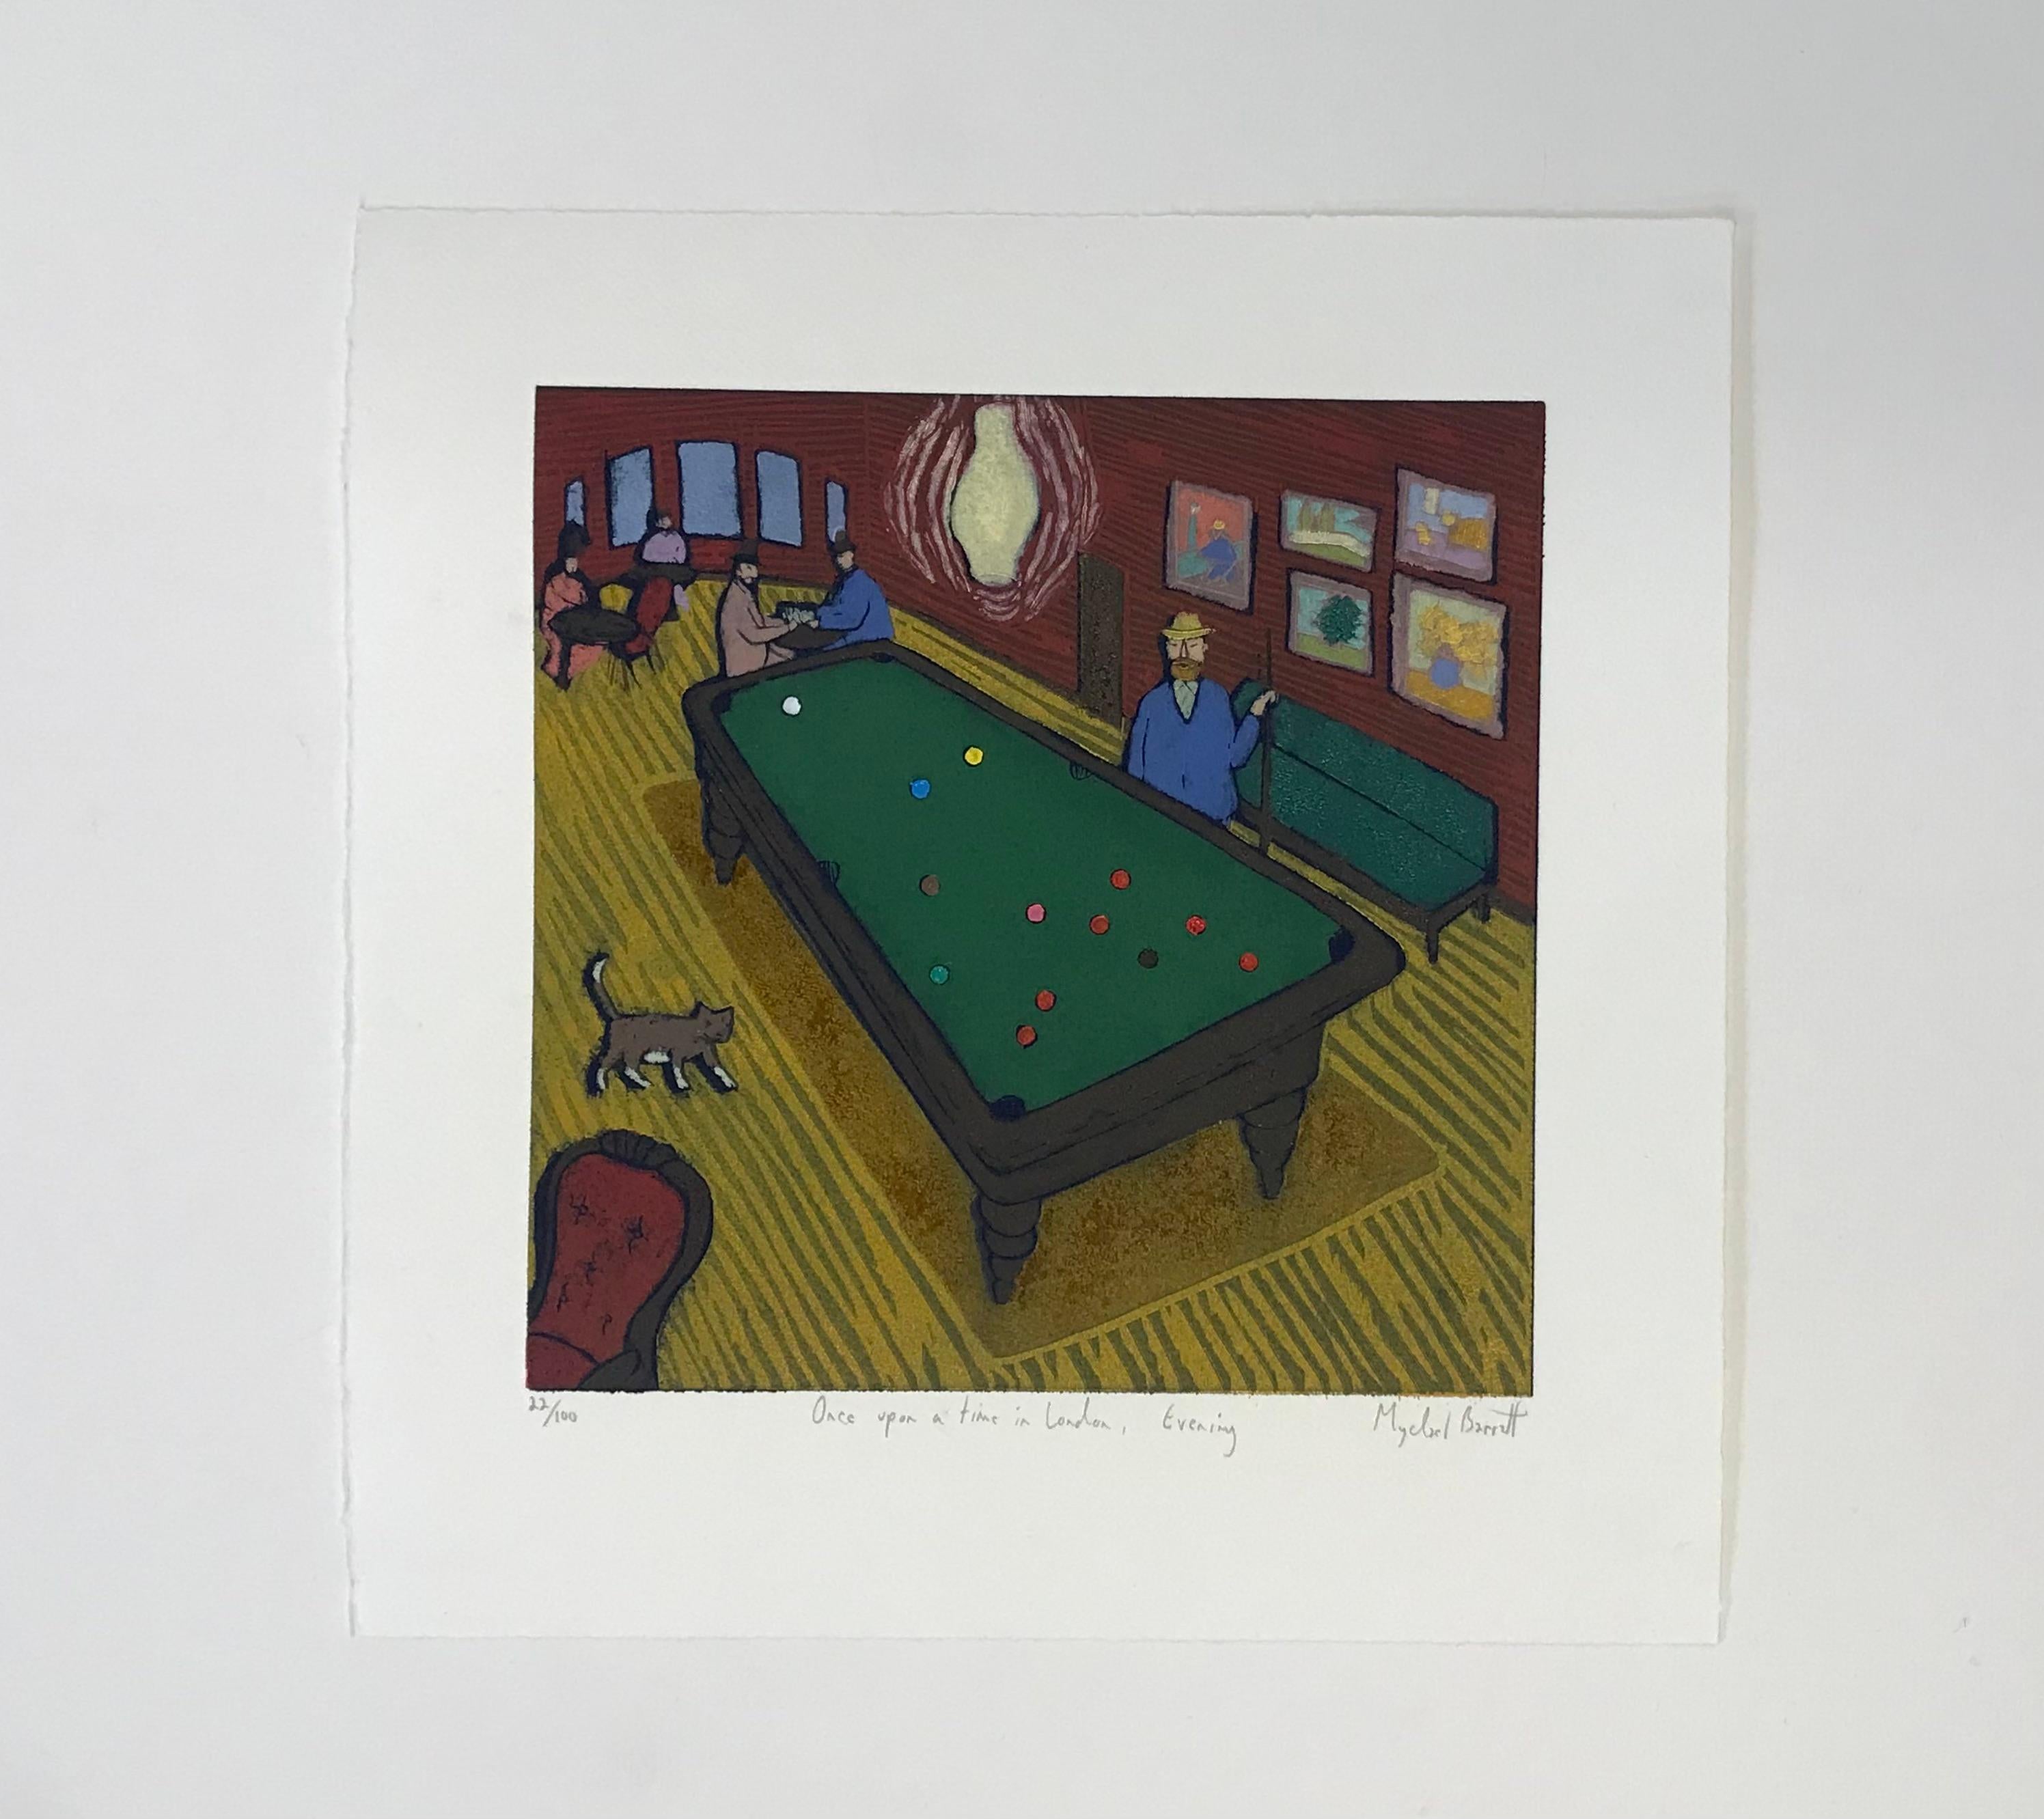 A limited edition woodcut on paper print by Mychael Barratt of Vincent Van Gogh enjoying a game of pool. A cat appears next to the pool  with a group of people sat at tables, in a house of burgundy walls and yellow floors.

Additional